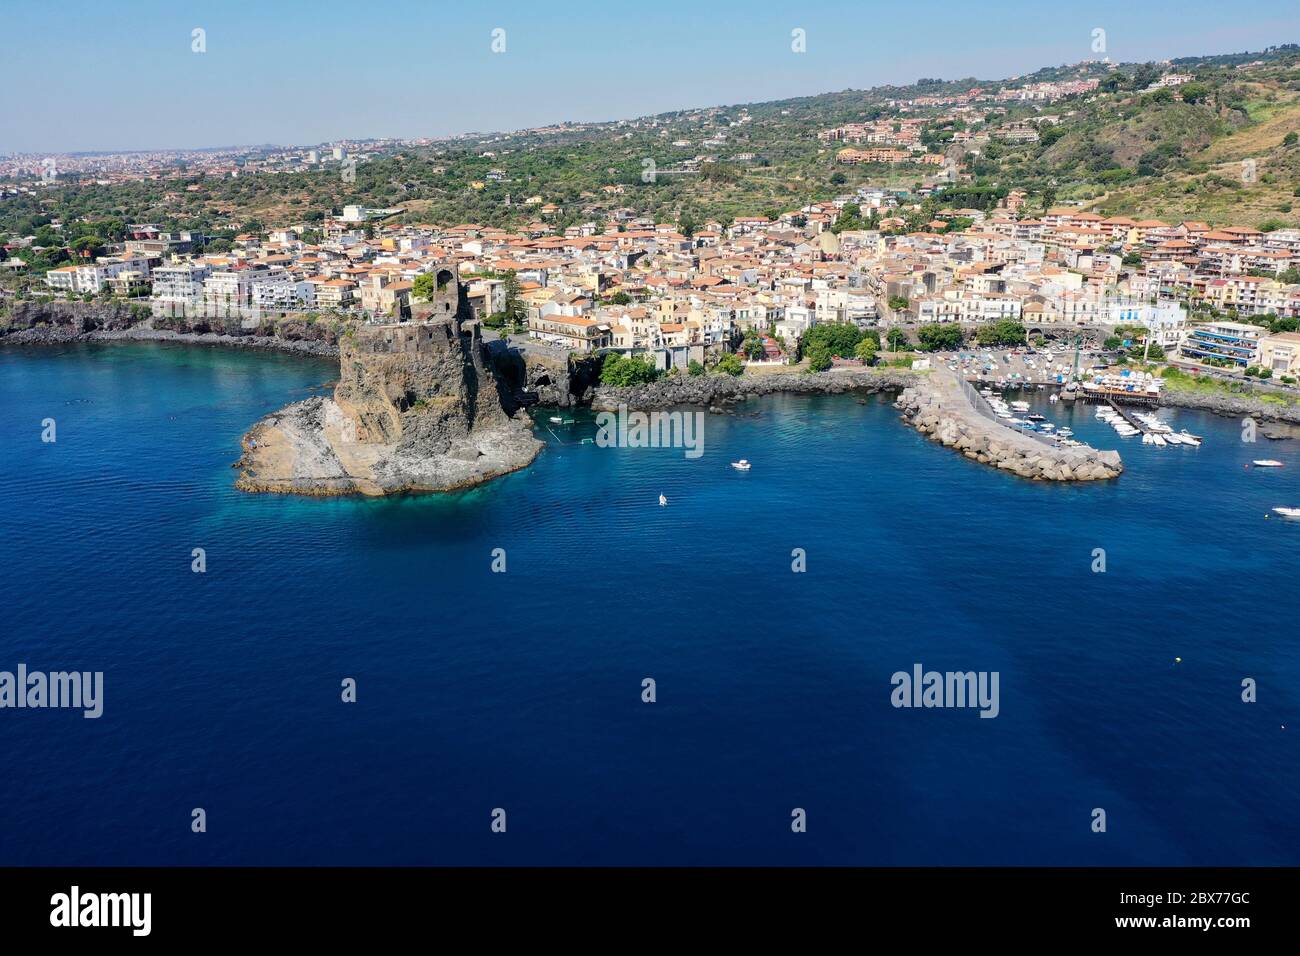 Acicastello seaport: View during the summer season of the city and of the clear blue seabed with Castle Stock Photo